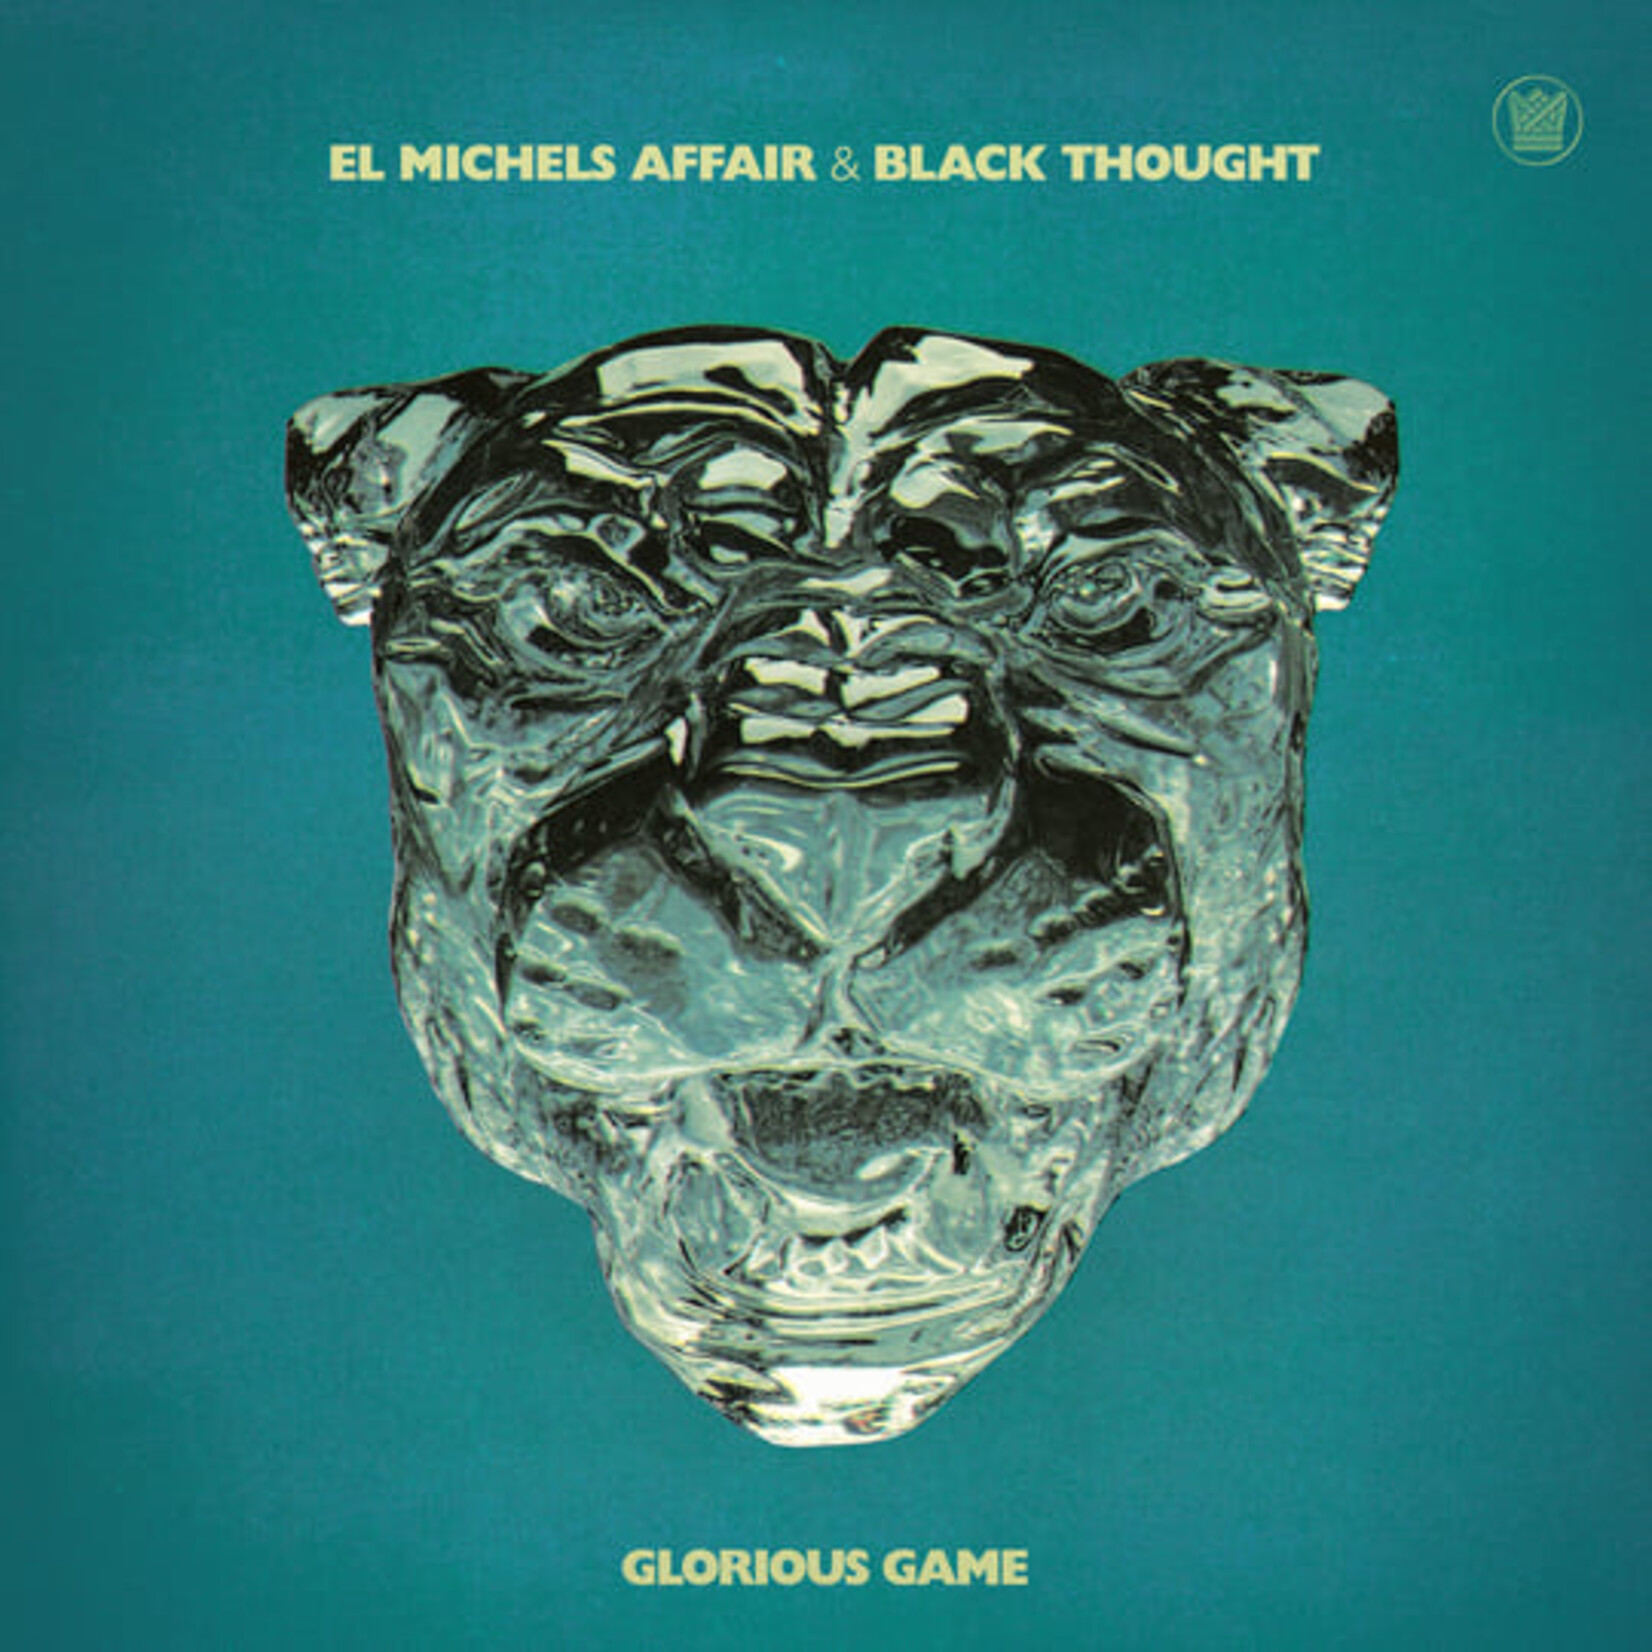 El Michels Affair & Black Thought -Glorious Game